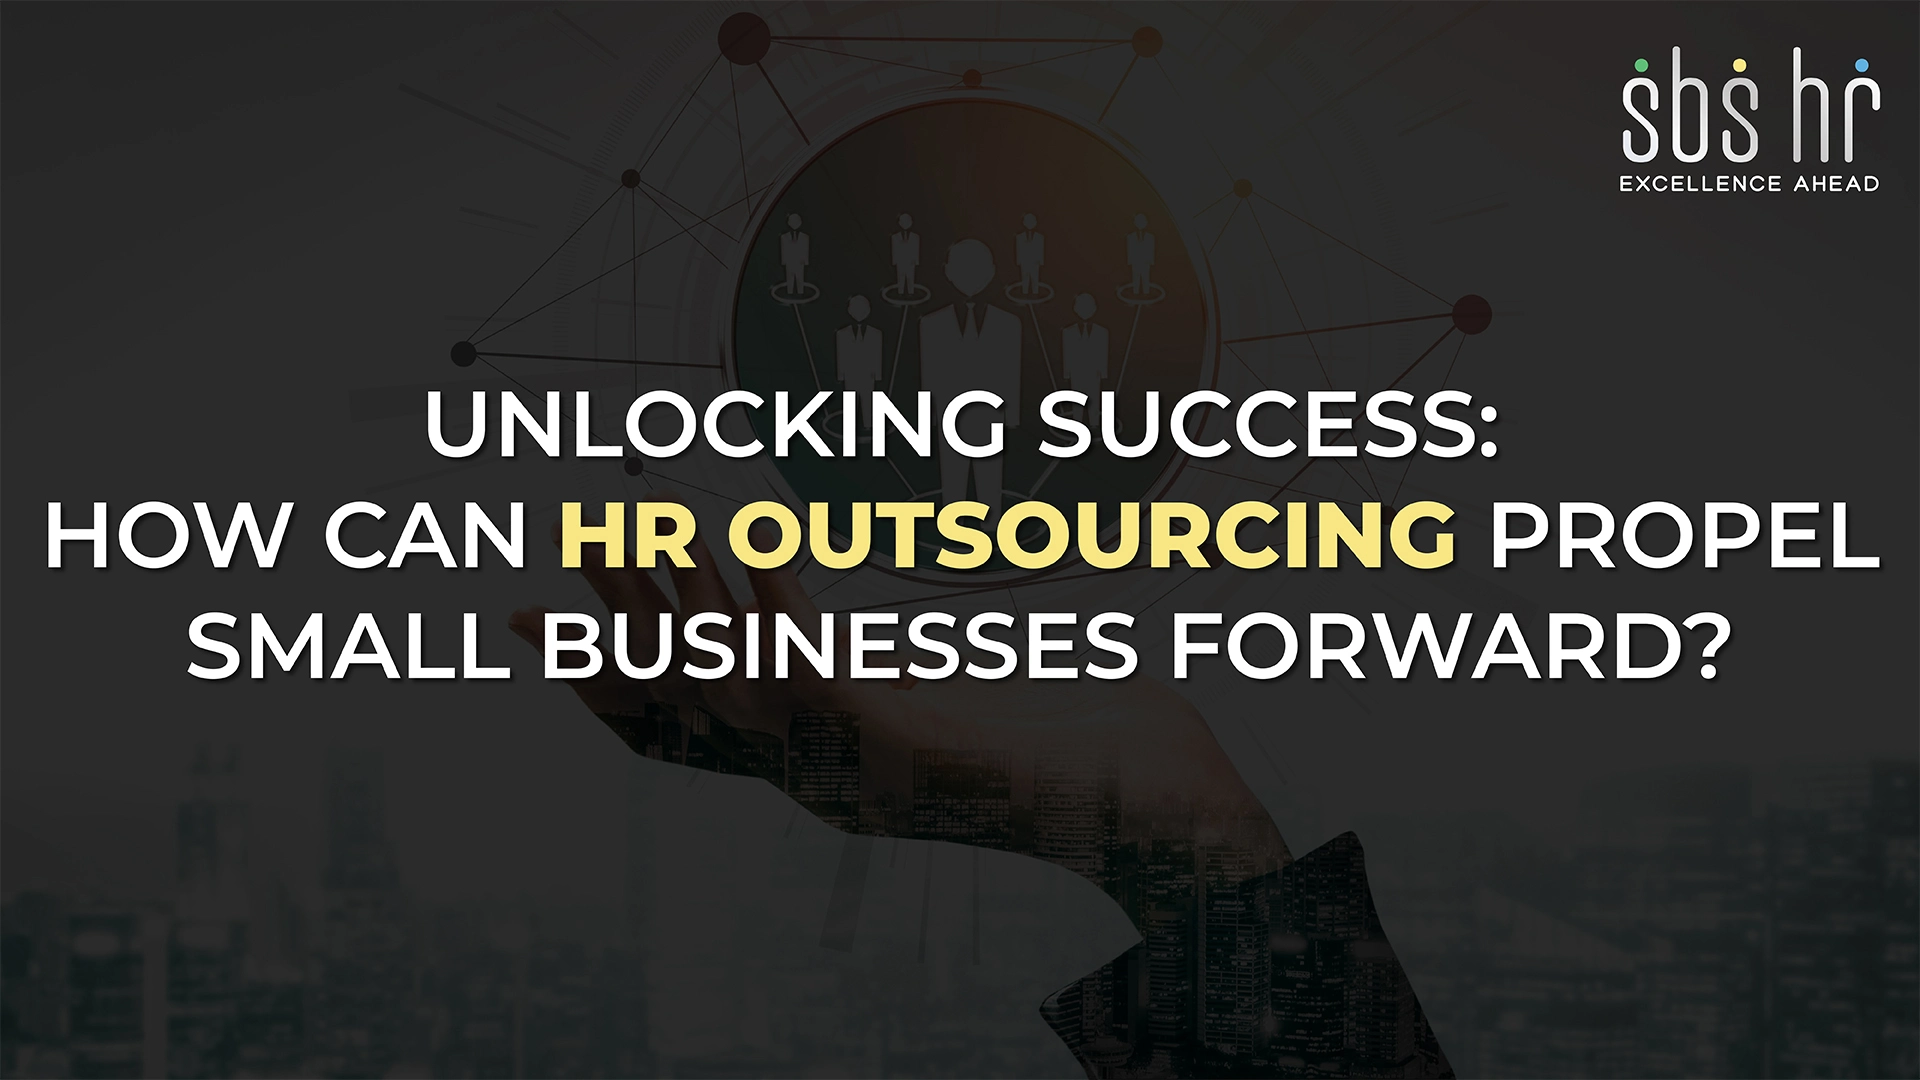 How Can HR Outsourcing Propel Small Businesses Forward?